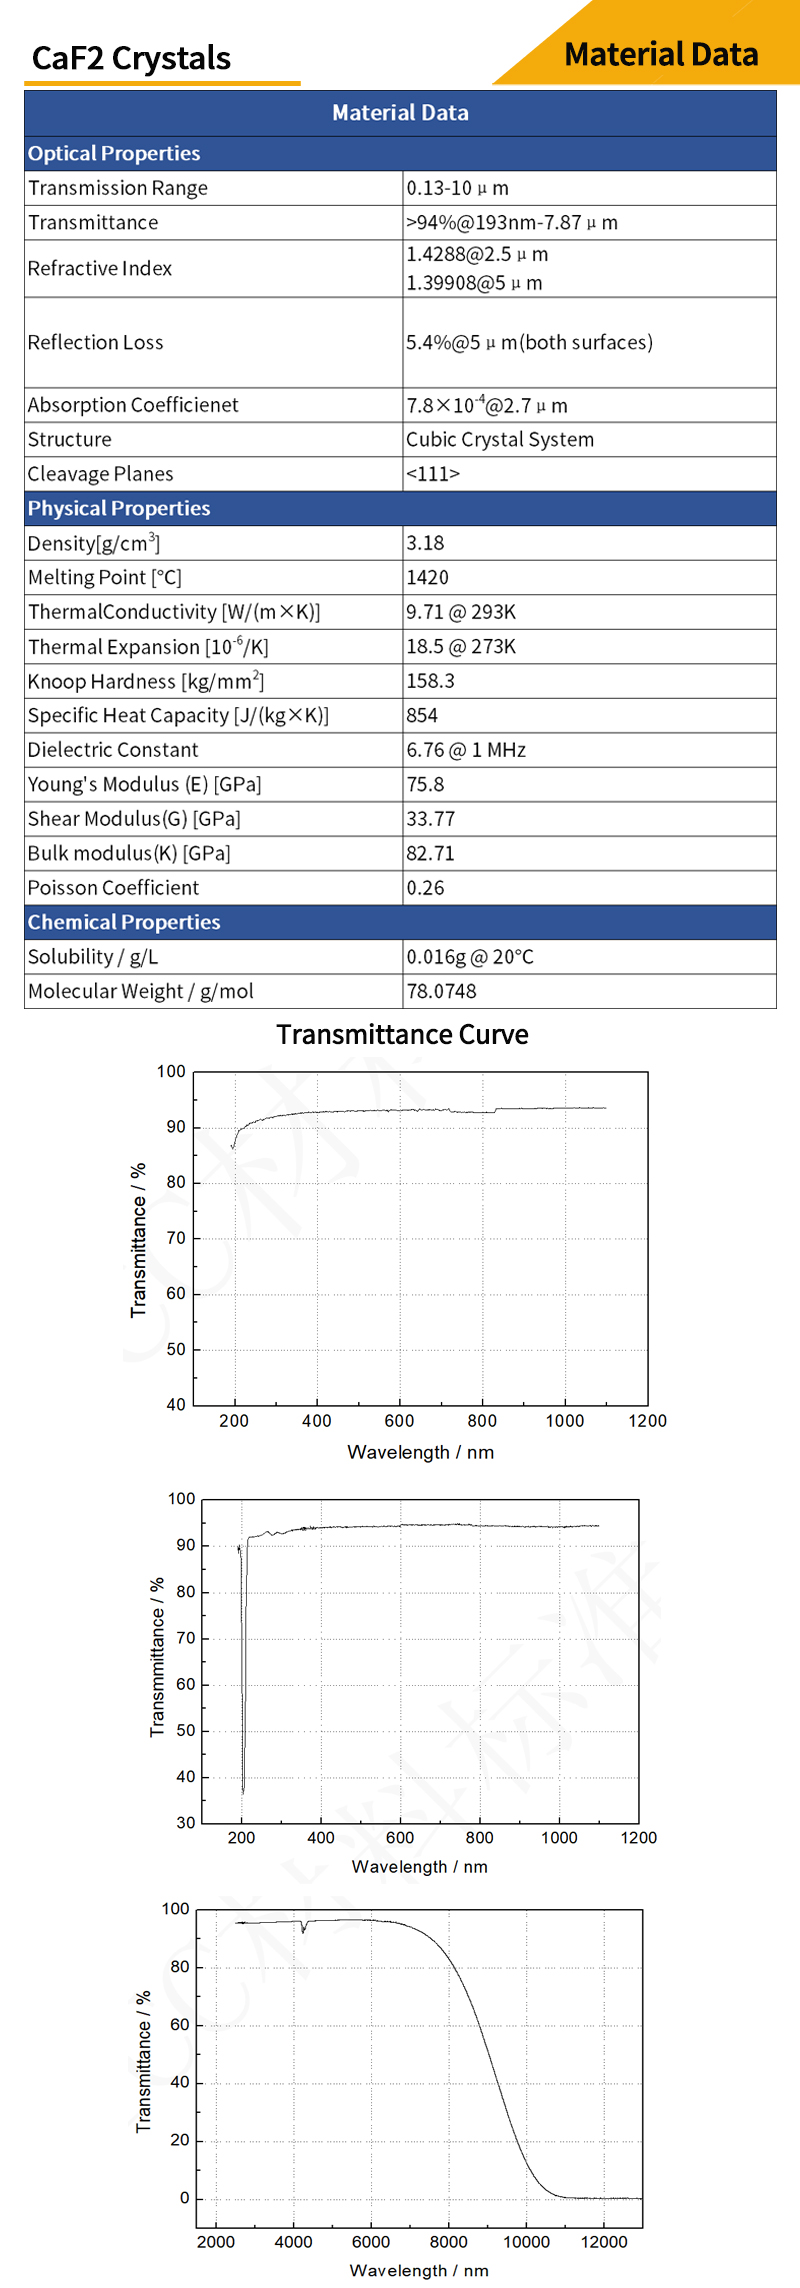 Oriented calcium fluoride material data and transmittance curves